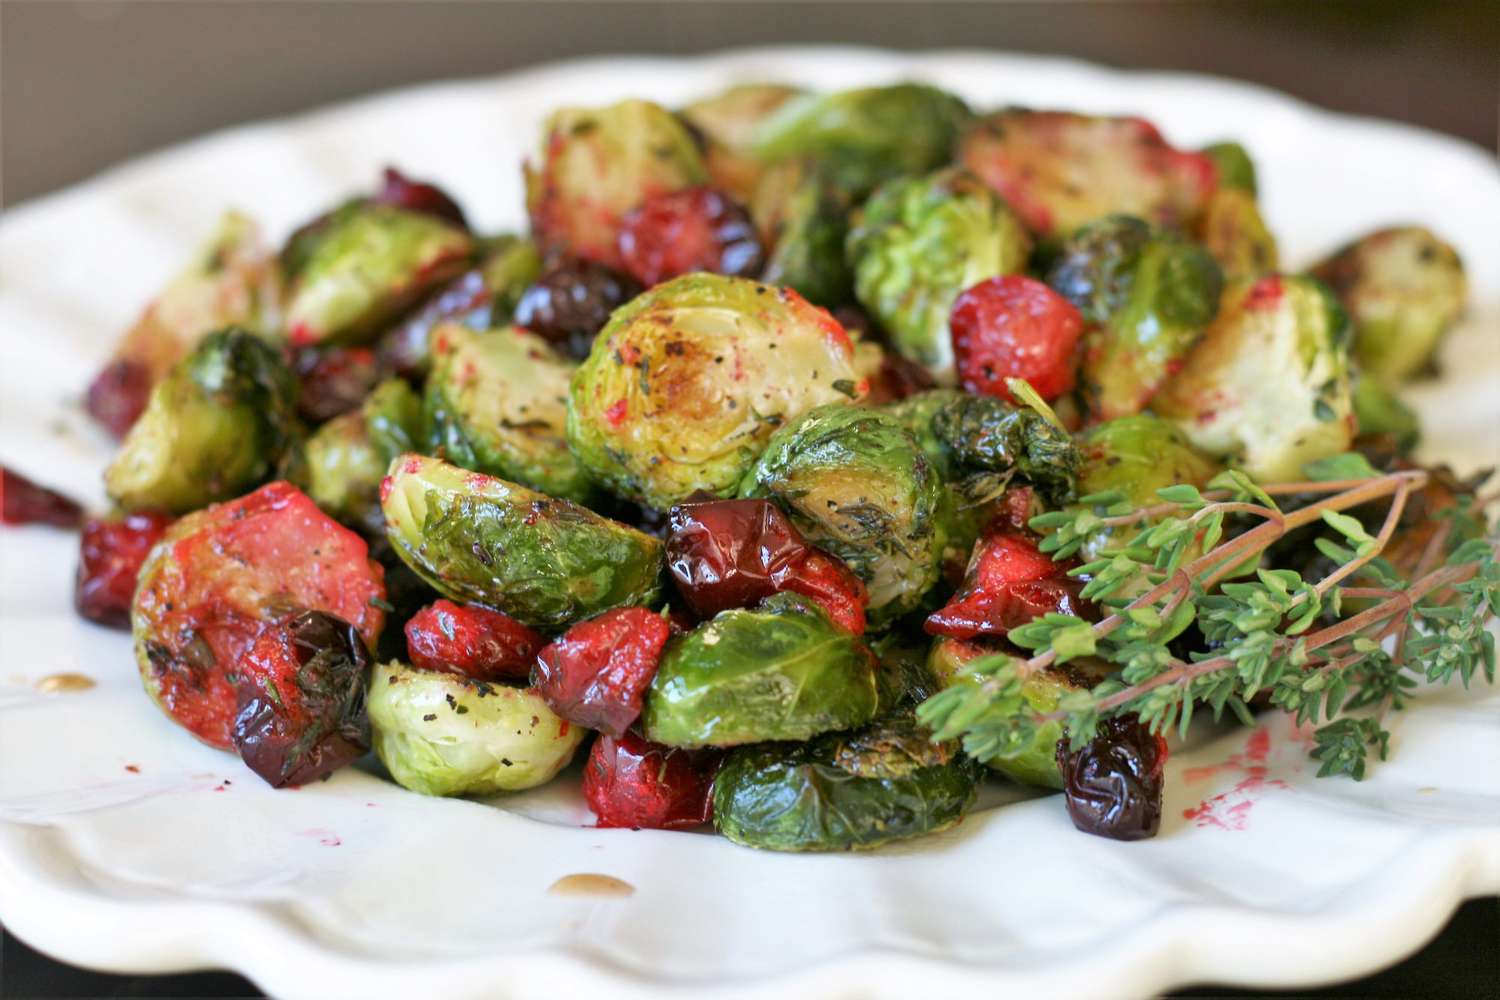 Thyme-Roasted Brussels Sprouts with Fresh Cranberries